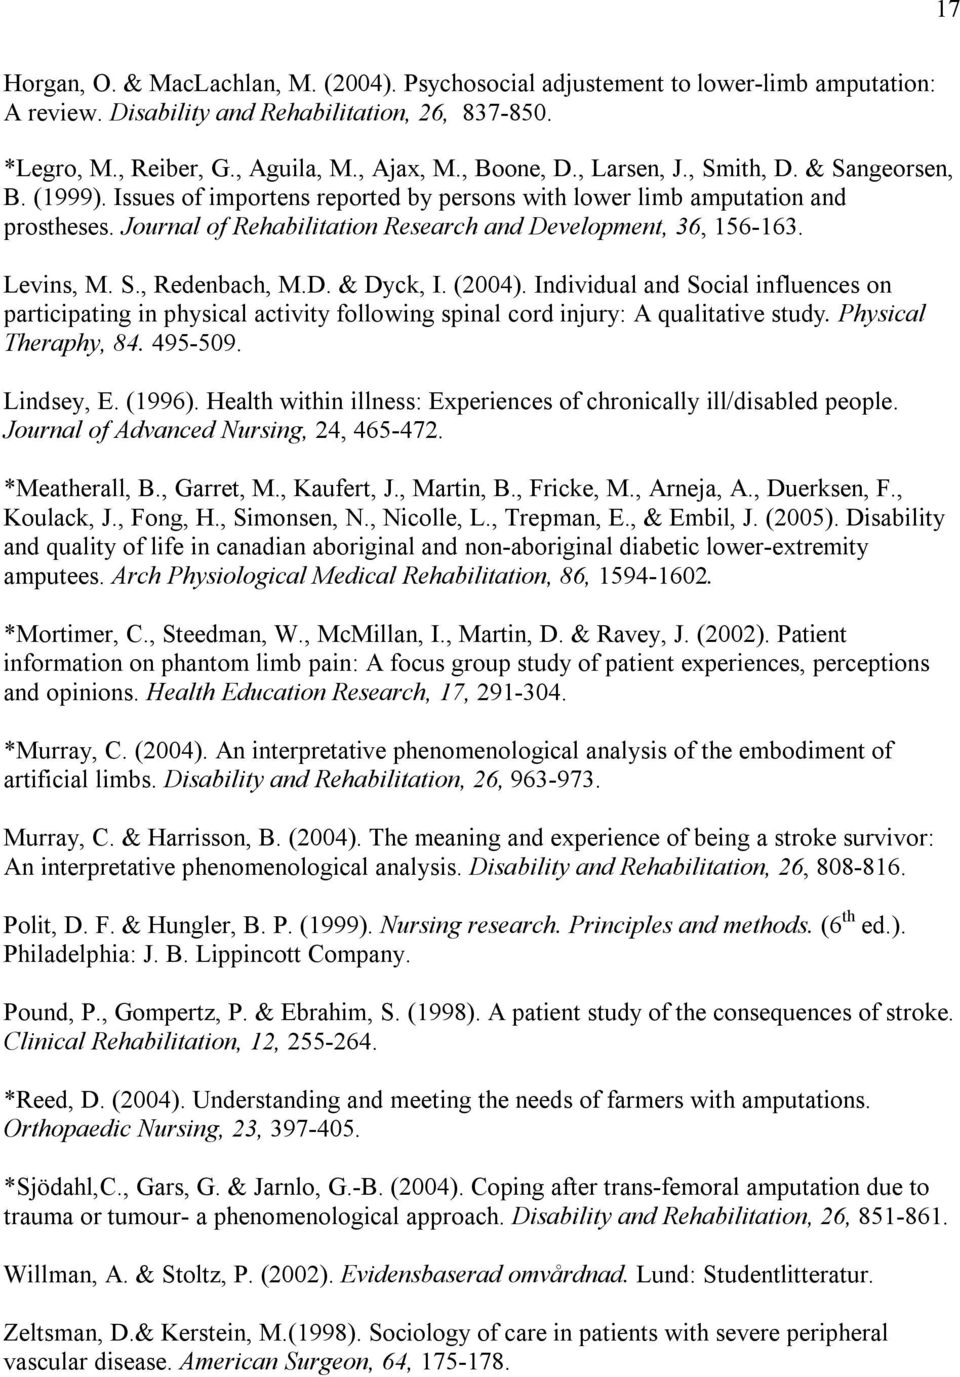 Levins, M. S., Redenbach, M.D. & Dyck, I. (2004). Individual and Social influences on participating in physical activity following spinal cord injury: A qualitative study. Physical Theraphy, 84.